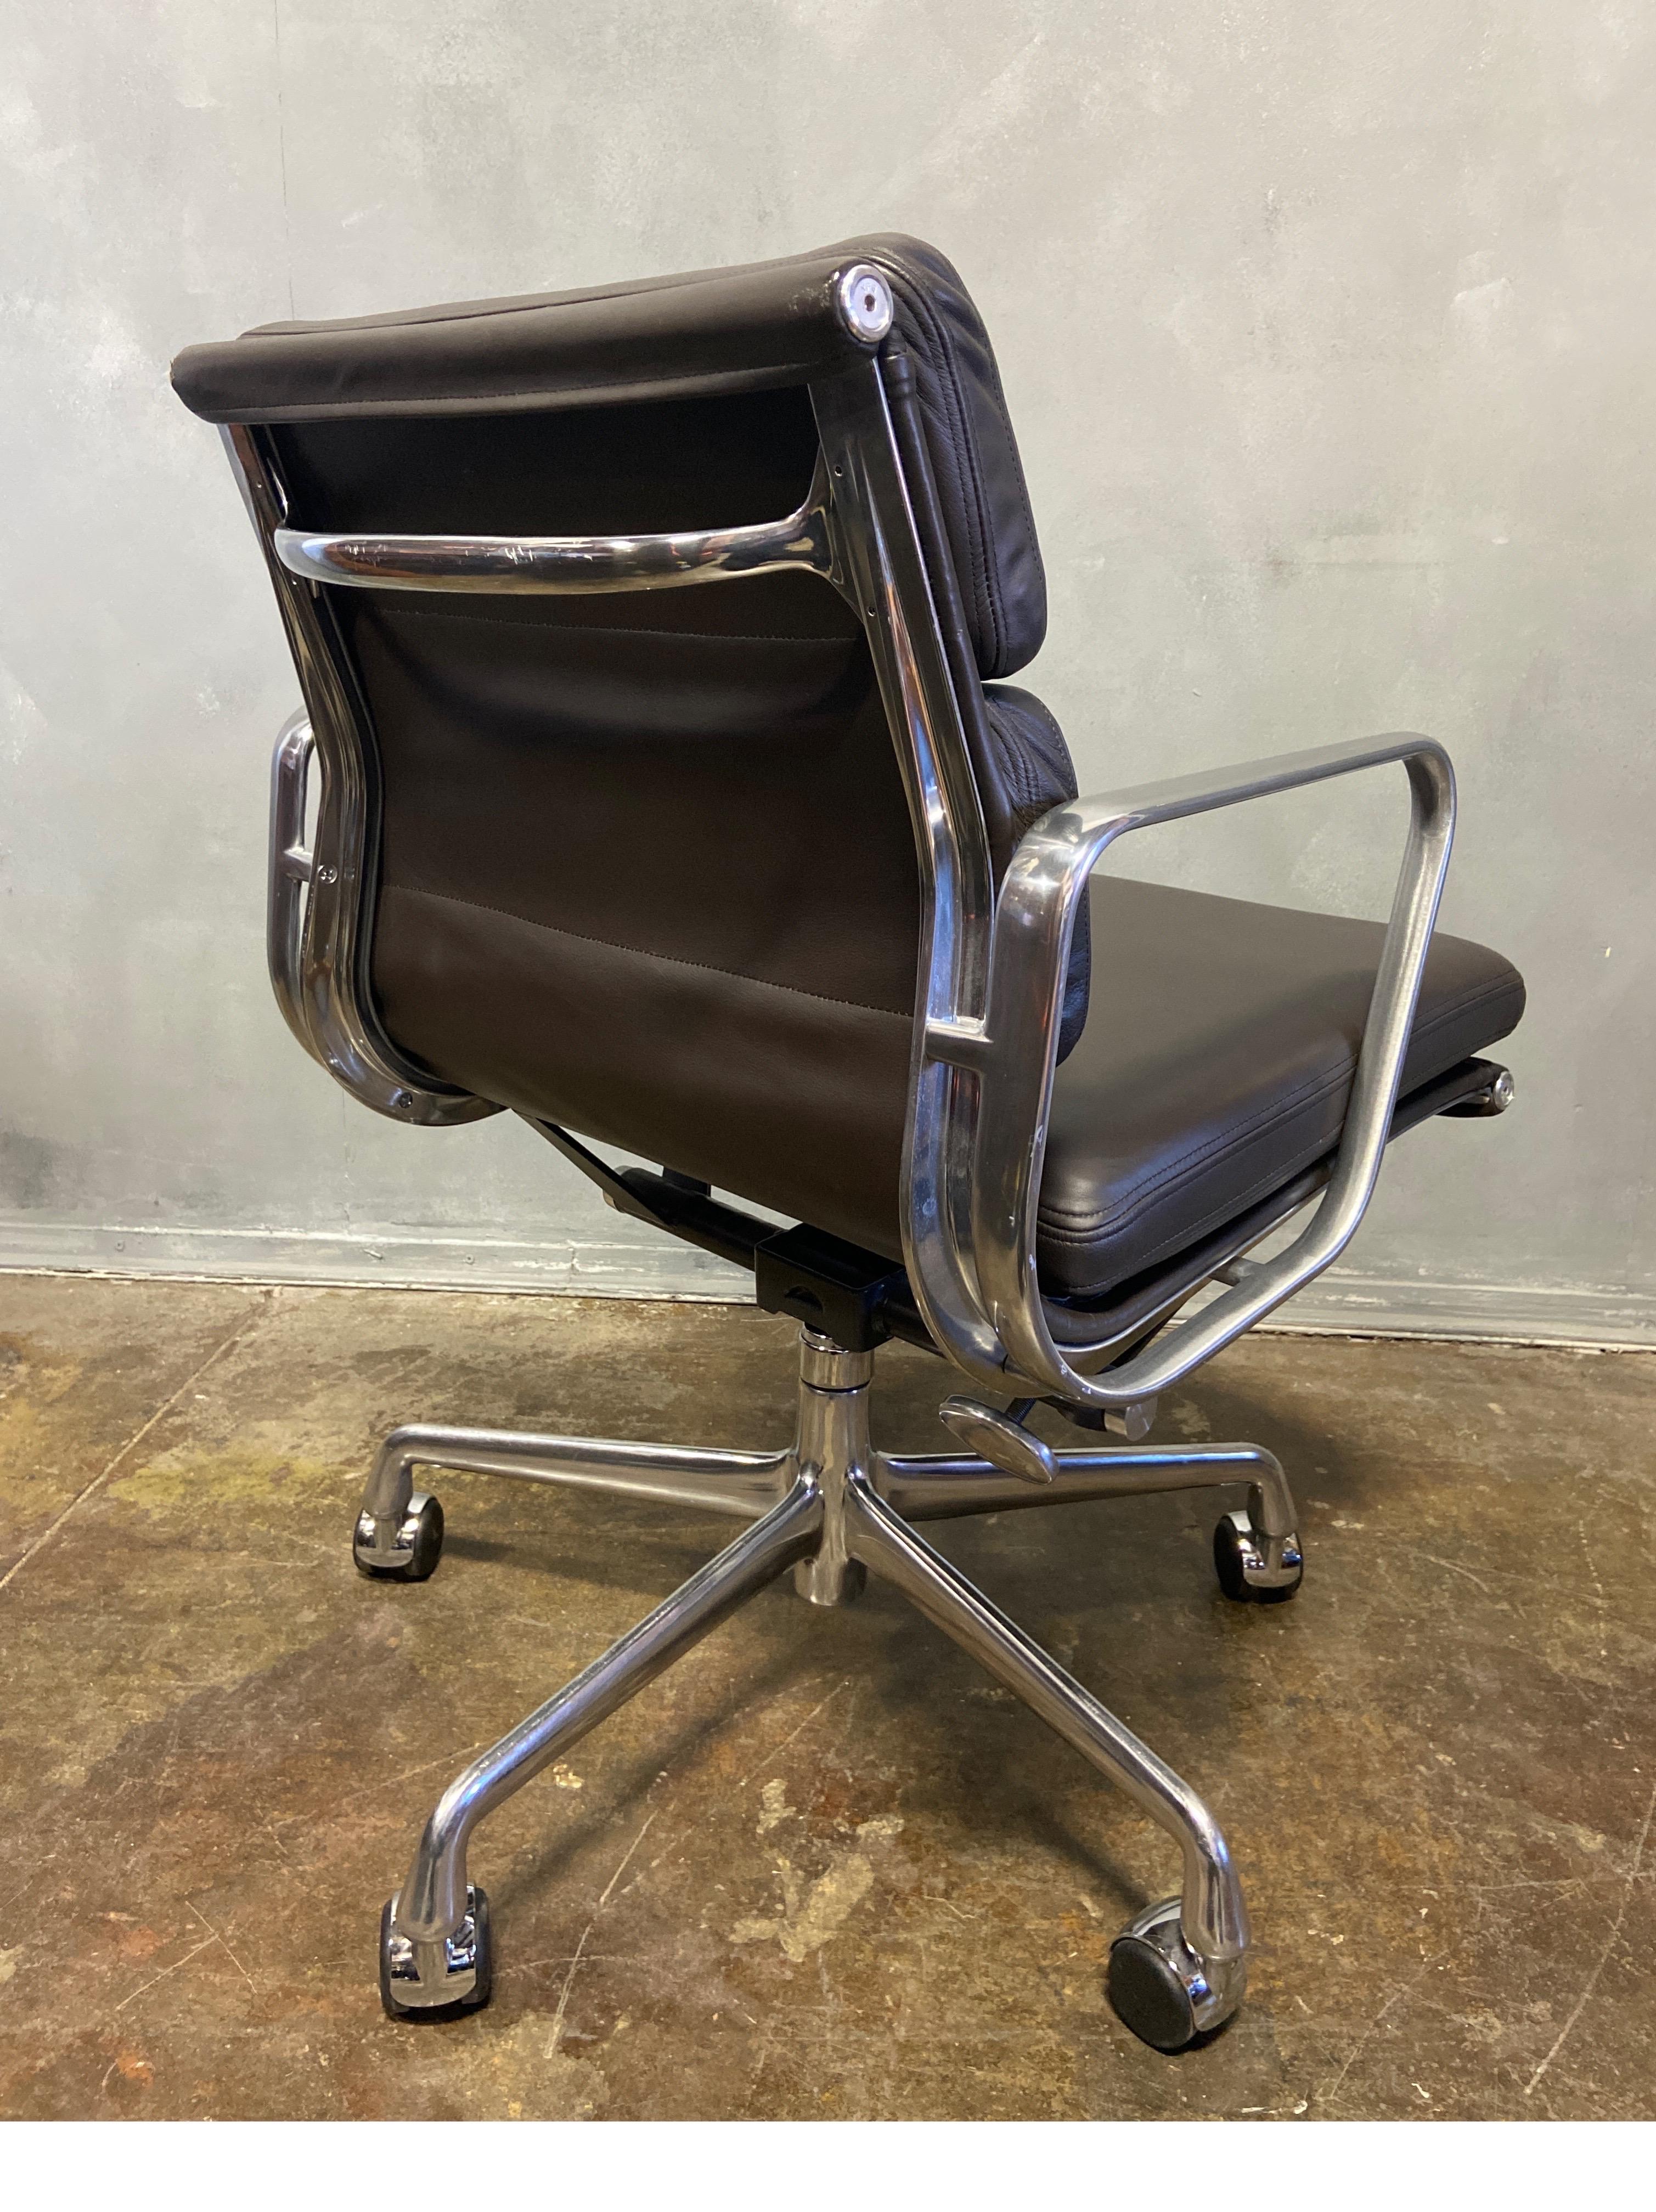 For your consideration is this authentic Eames for Herman Miller vintage soft pad chairs in Espresso Brown leather. Adjustable tilt and height. These authentic vintage examples are icons of Mid-Century Modern design. These chairs are part of the